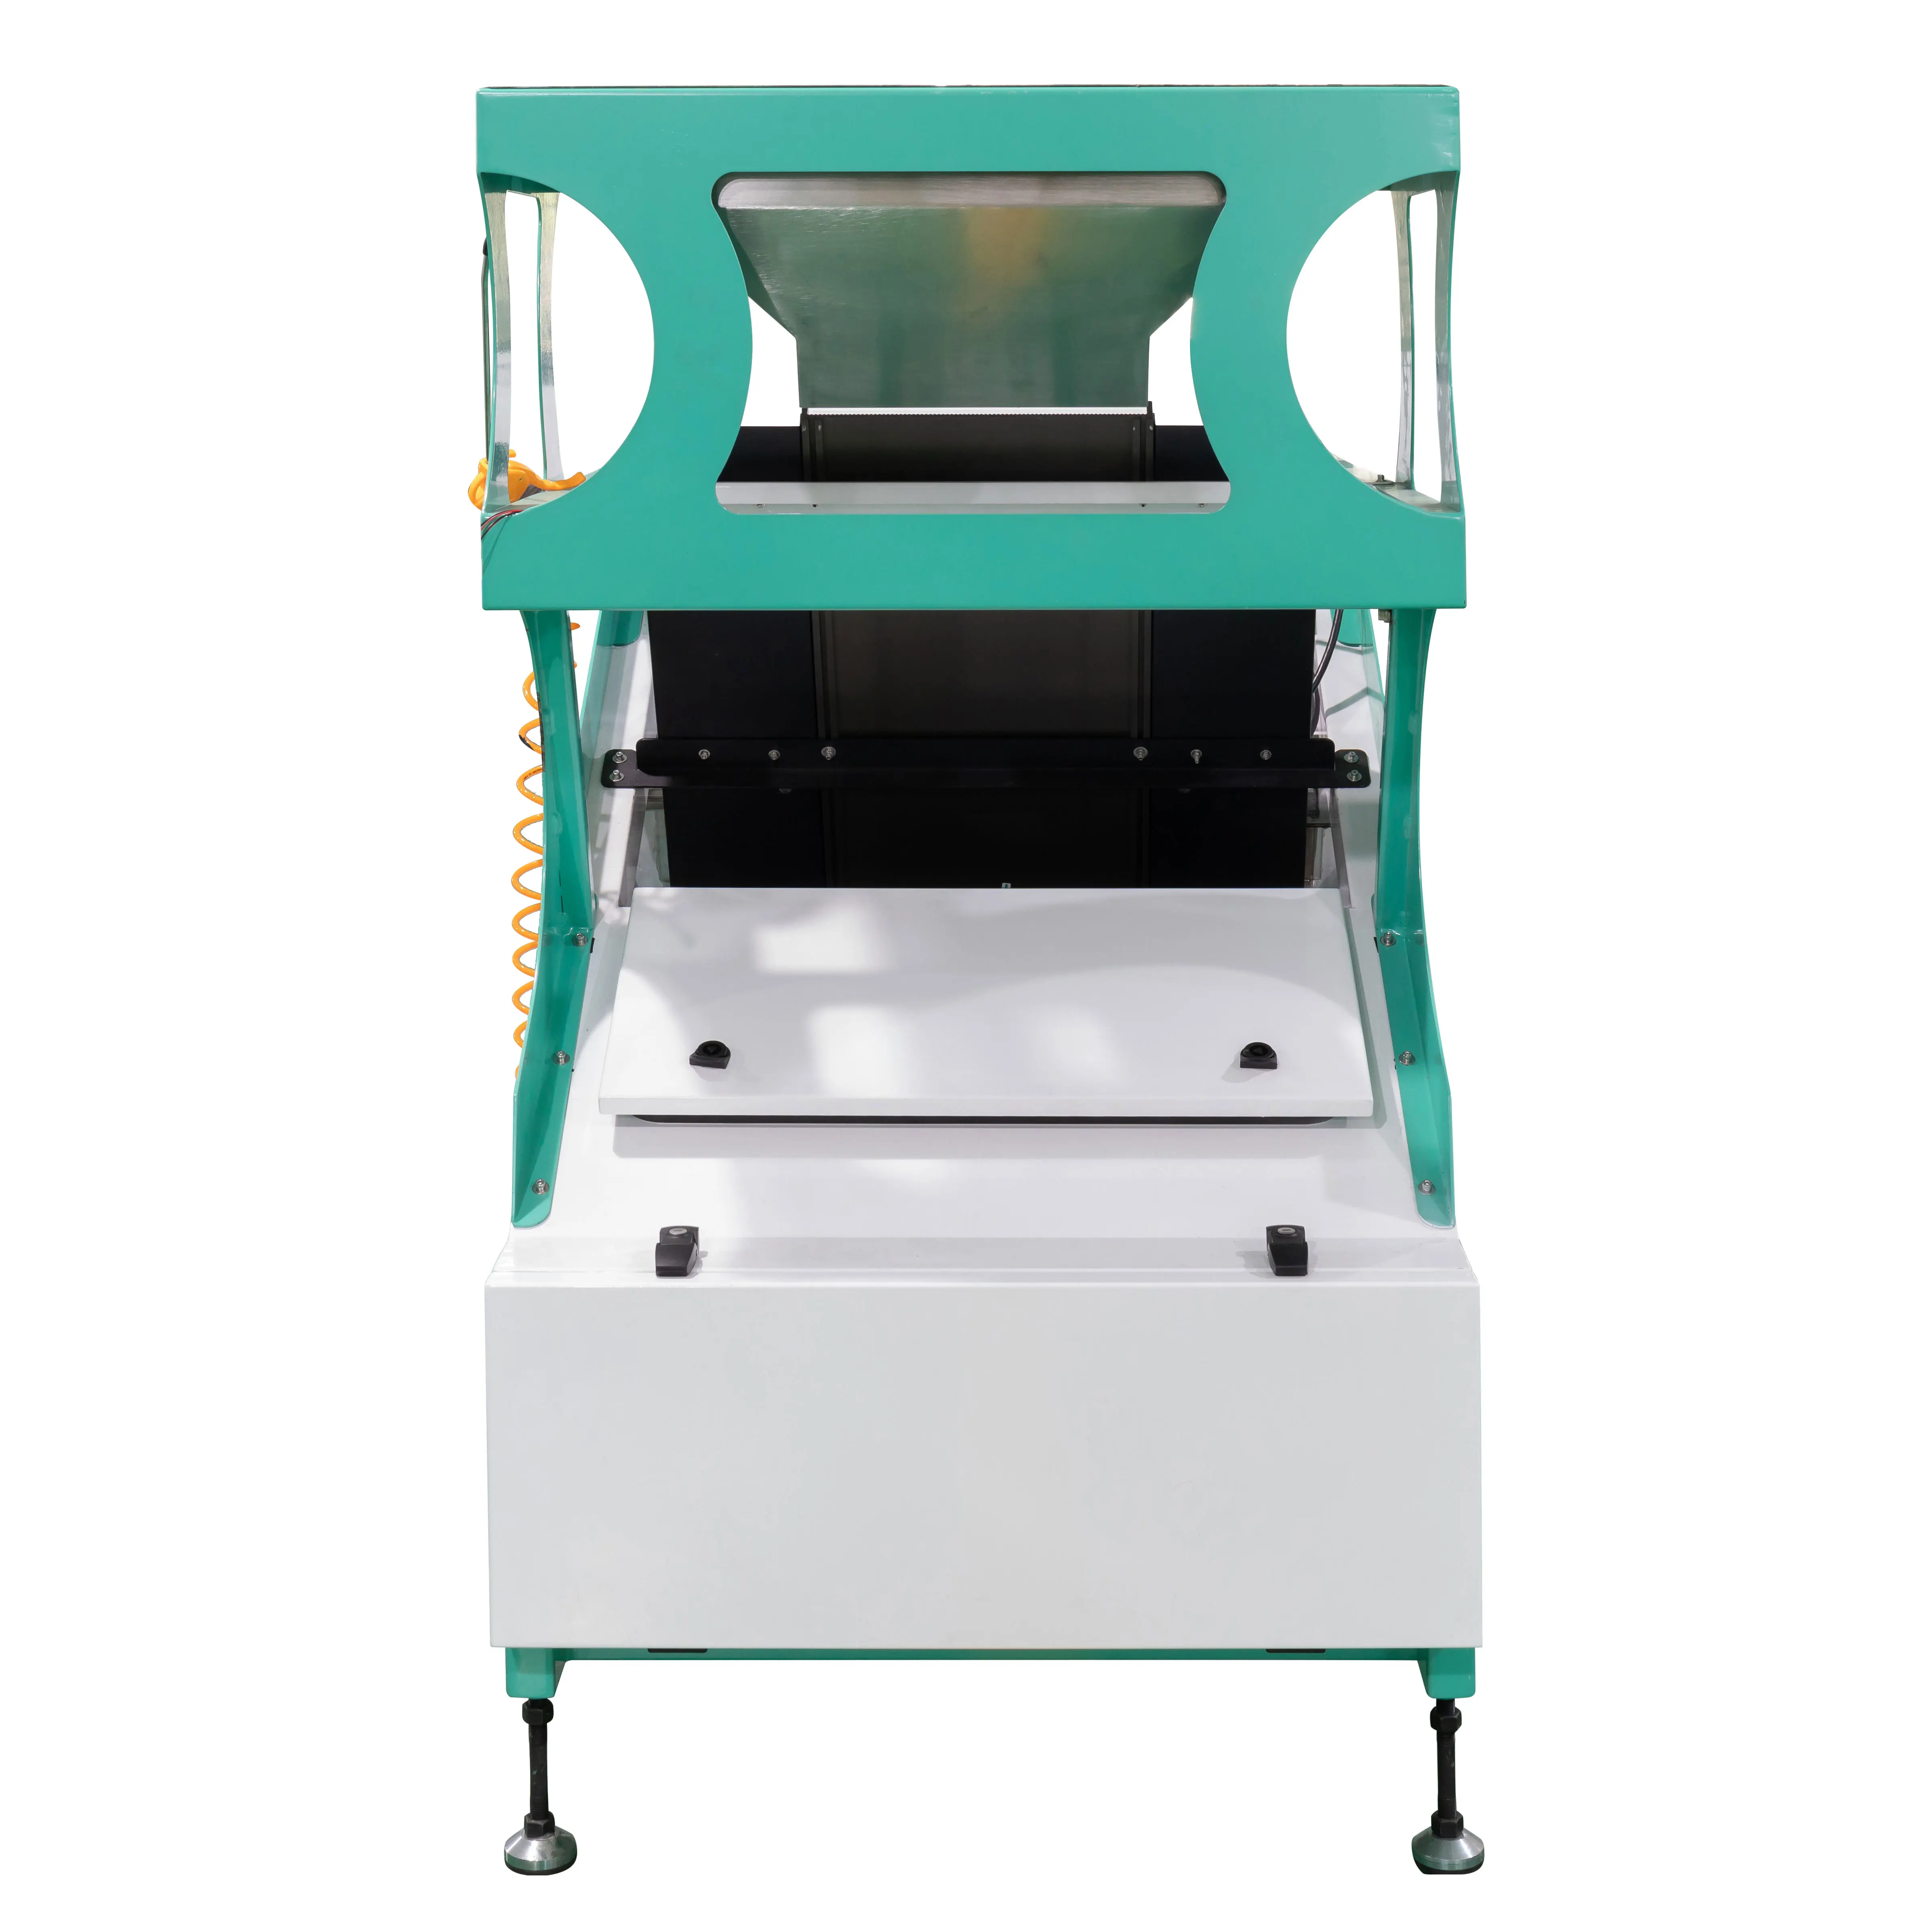 
Wenyao high capacity mini 1 chute rice color sorter sorting colour sorter machine with factory price wifi remote service 